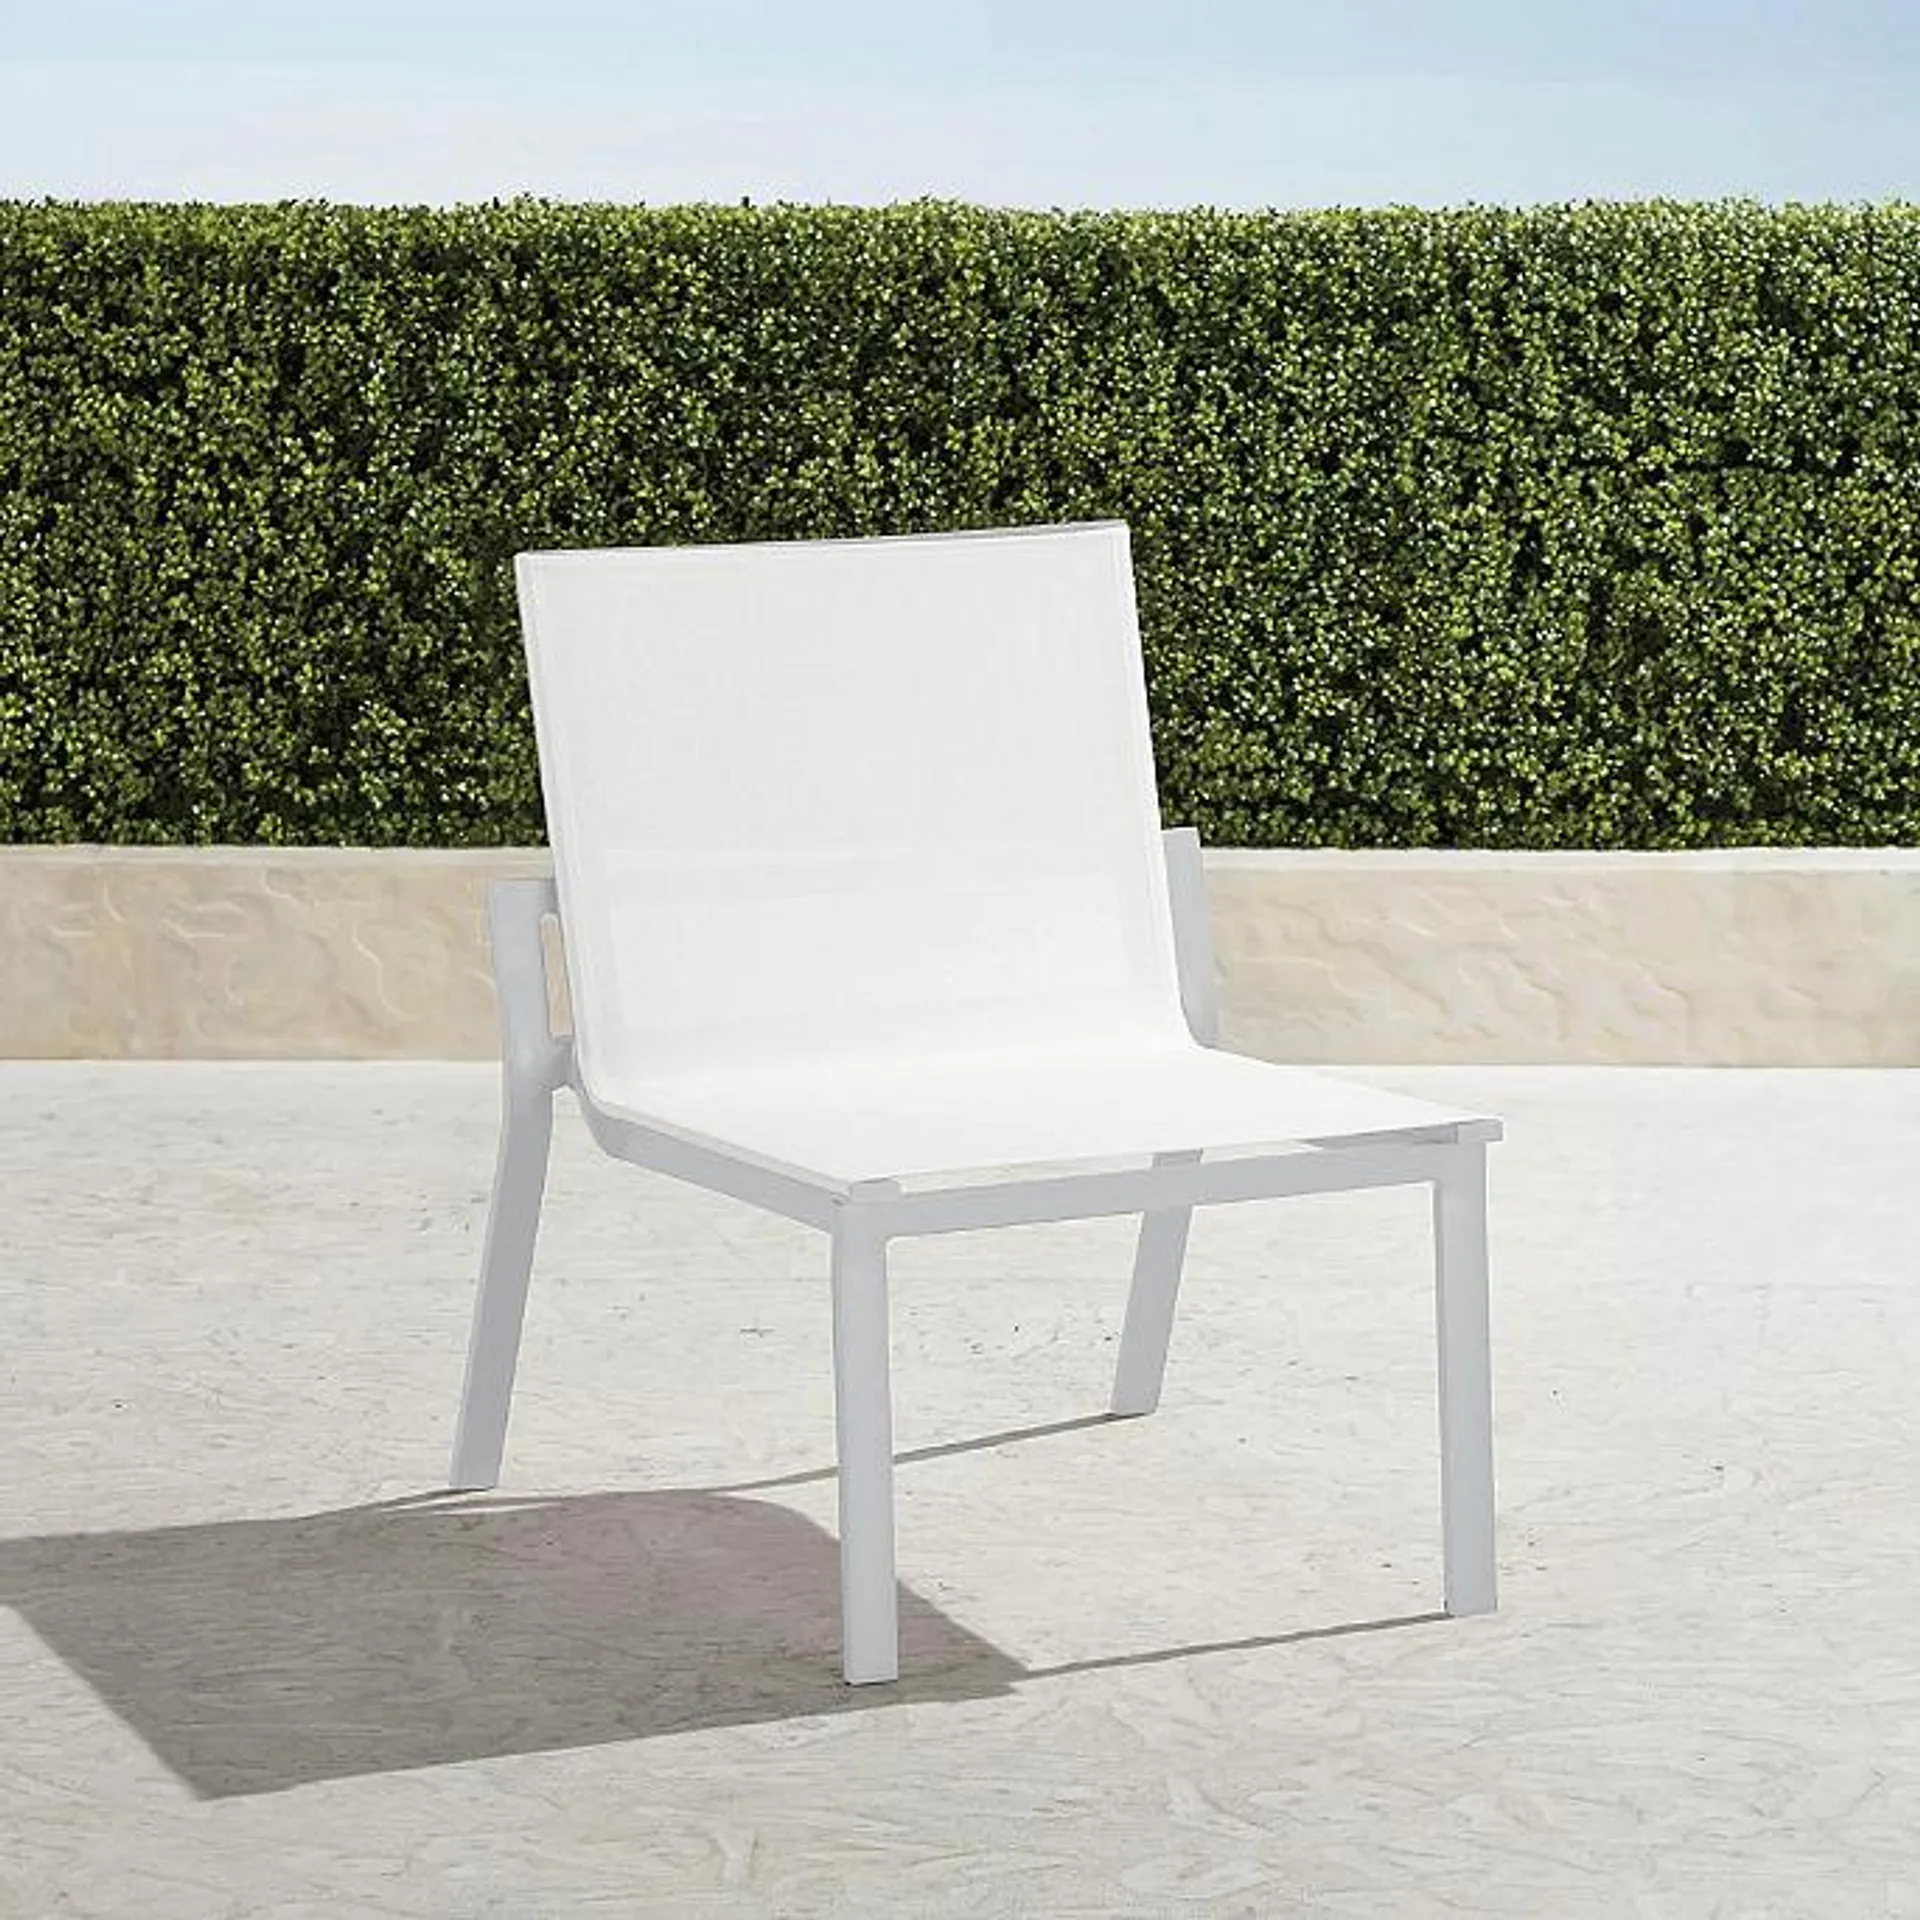 Frontgate Resort Collection™ Newport Beach Chair, Set of Two